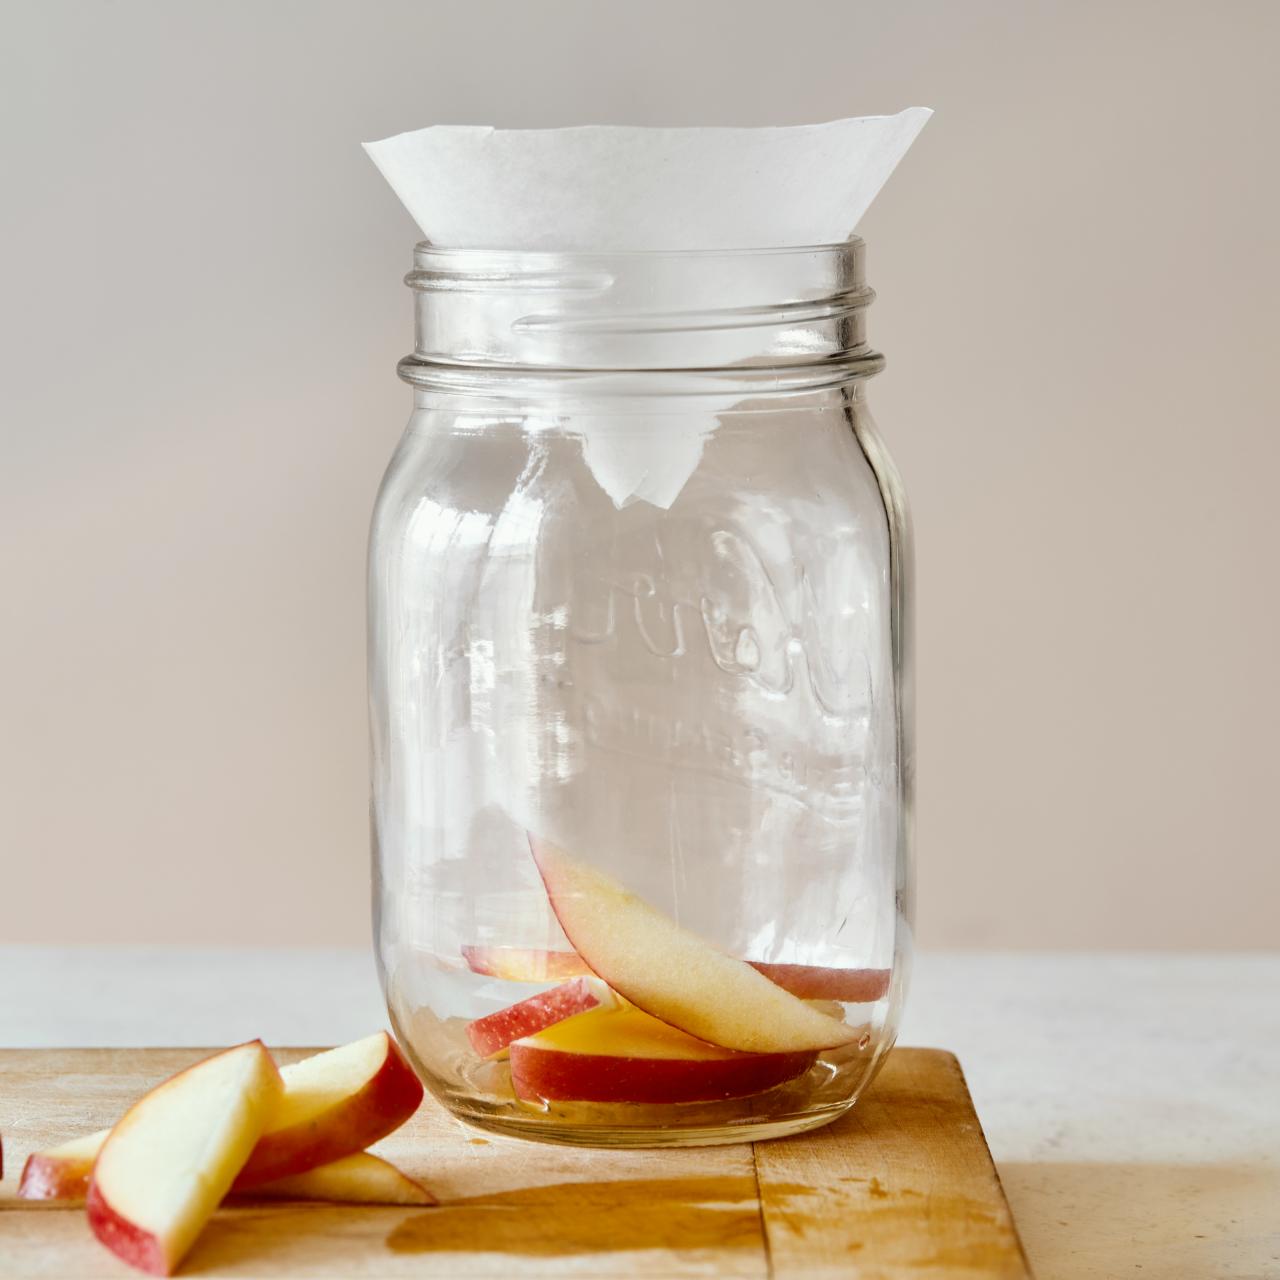 How to Trap and Get Rid of Fruit Flies